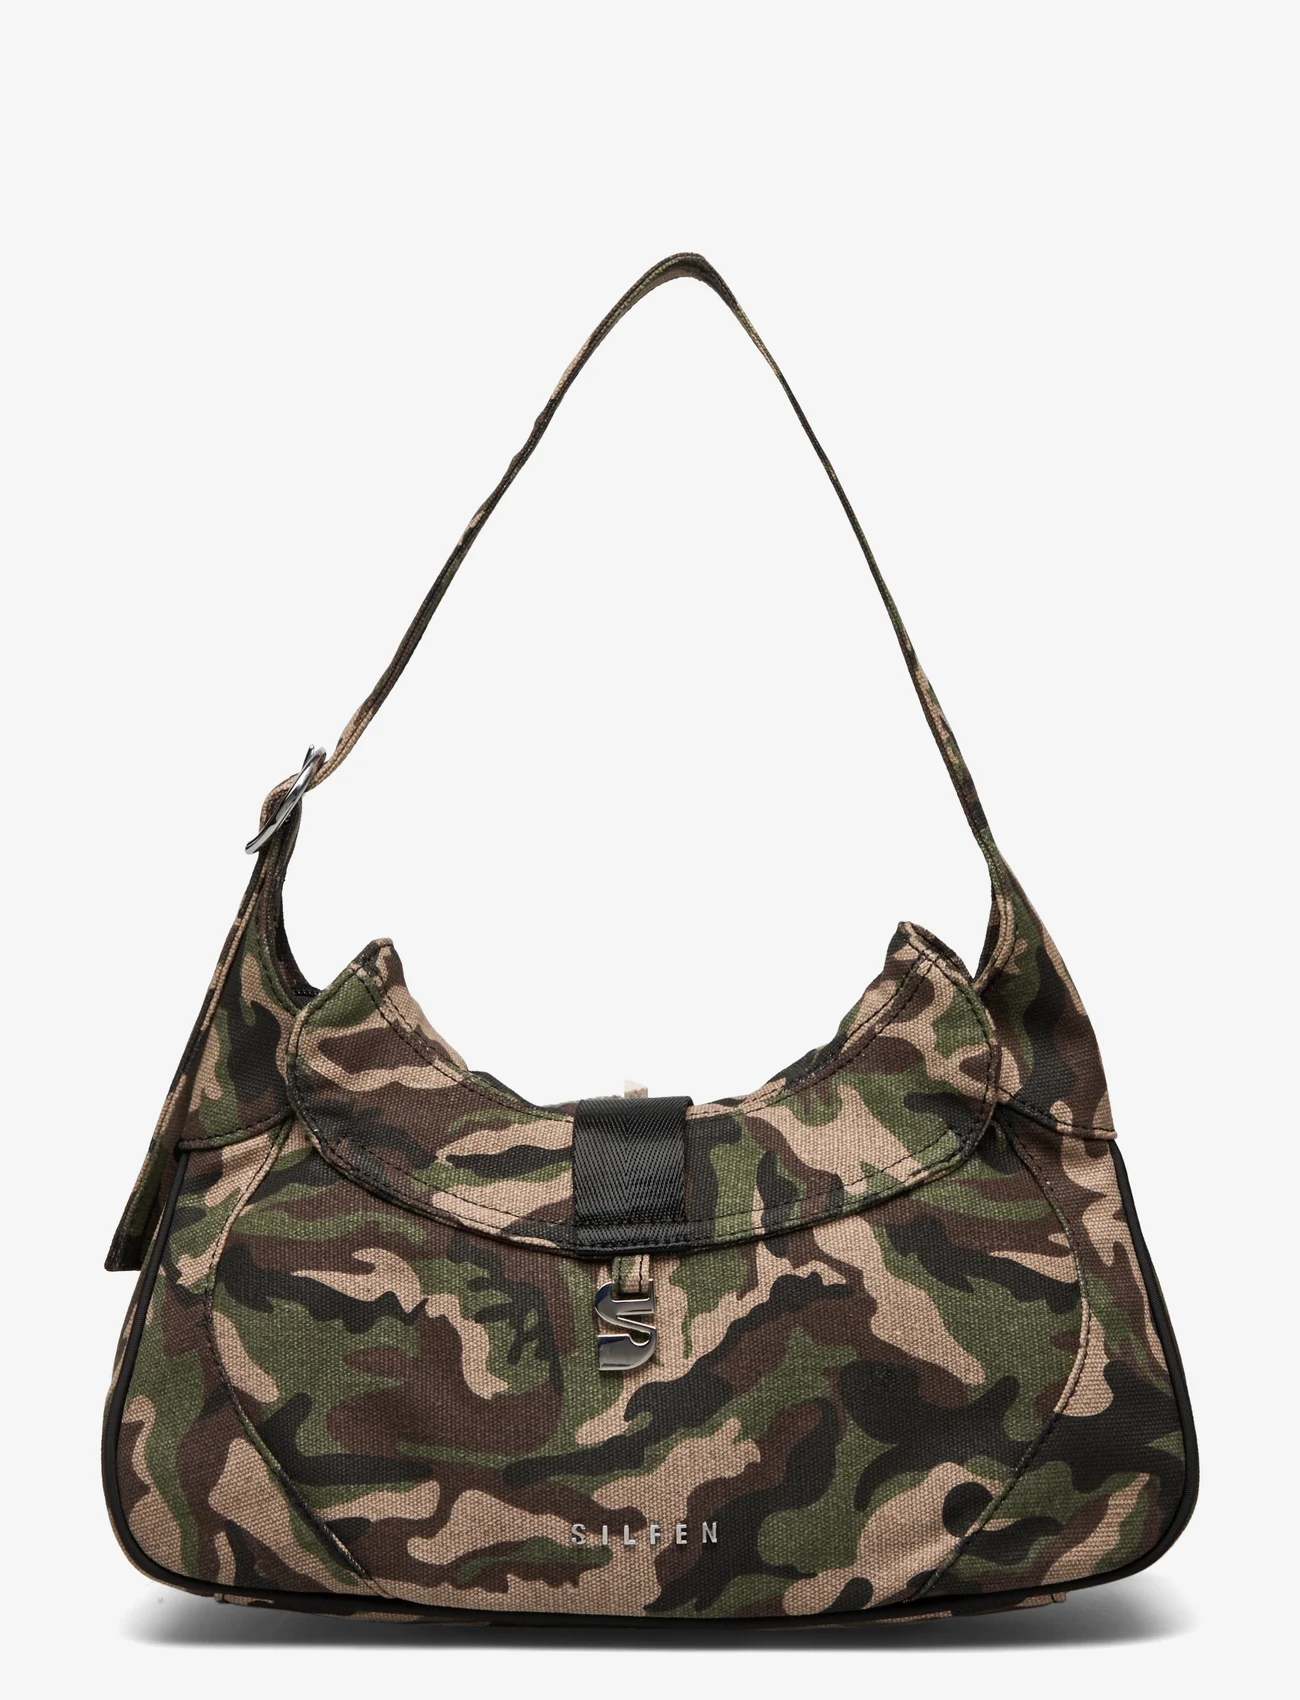 Silfen - Thea Shoulder Bag - party wear at outlet prices - natural camouflage - 1